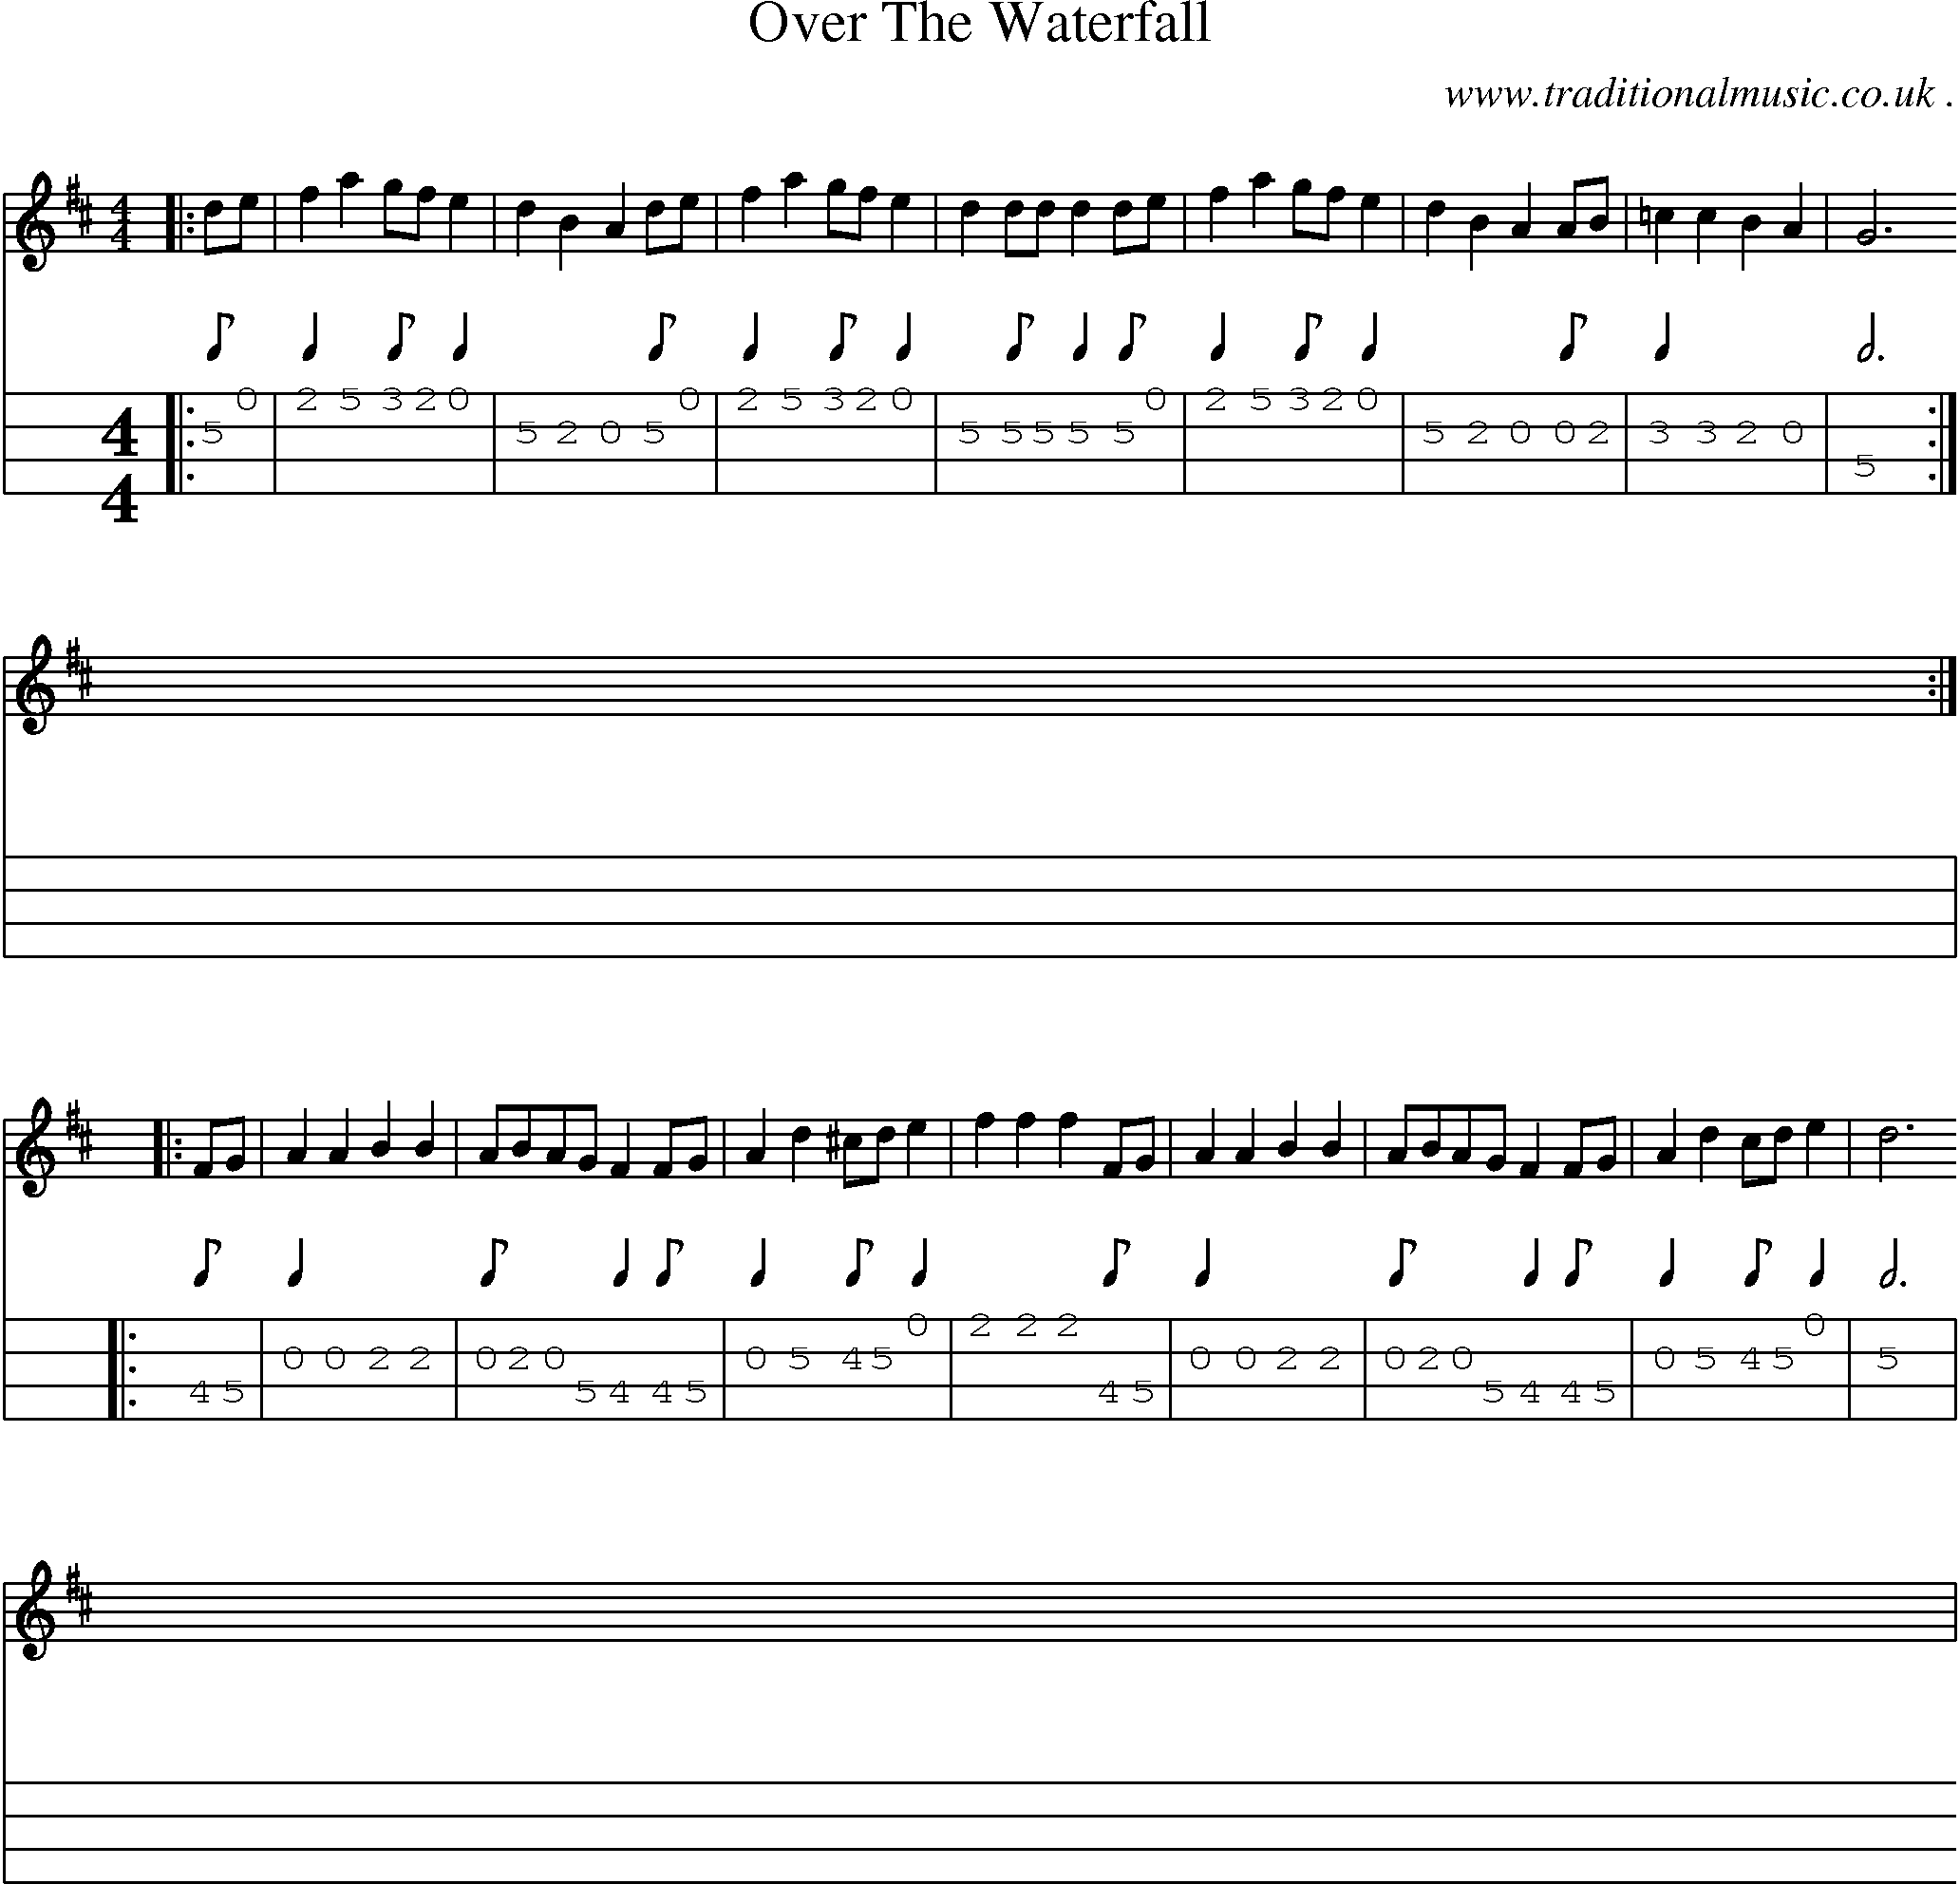 Music Score and Guitar Tabs for Over The Waterfall